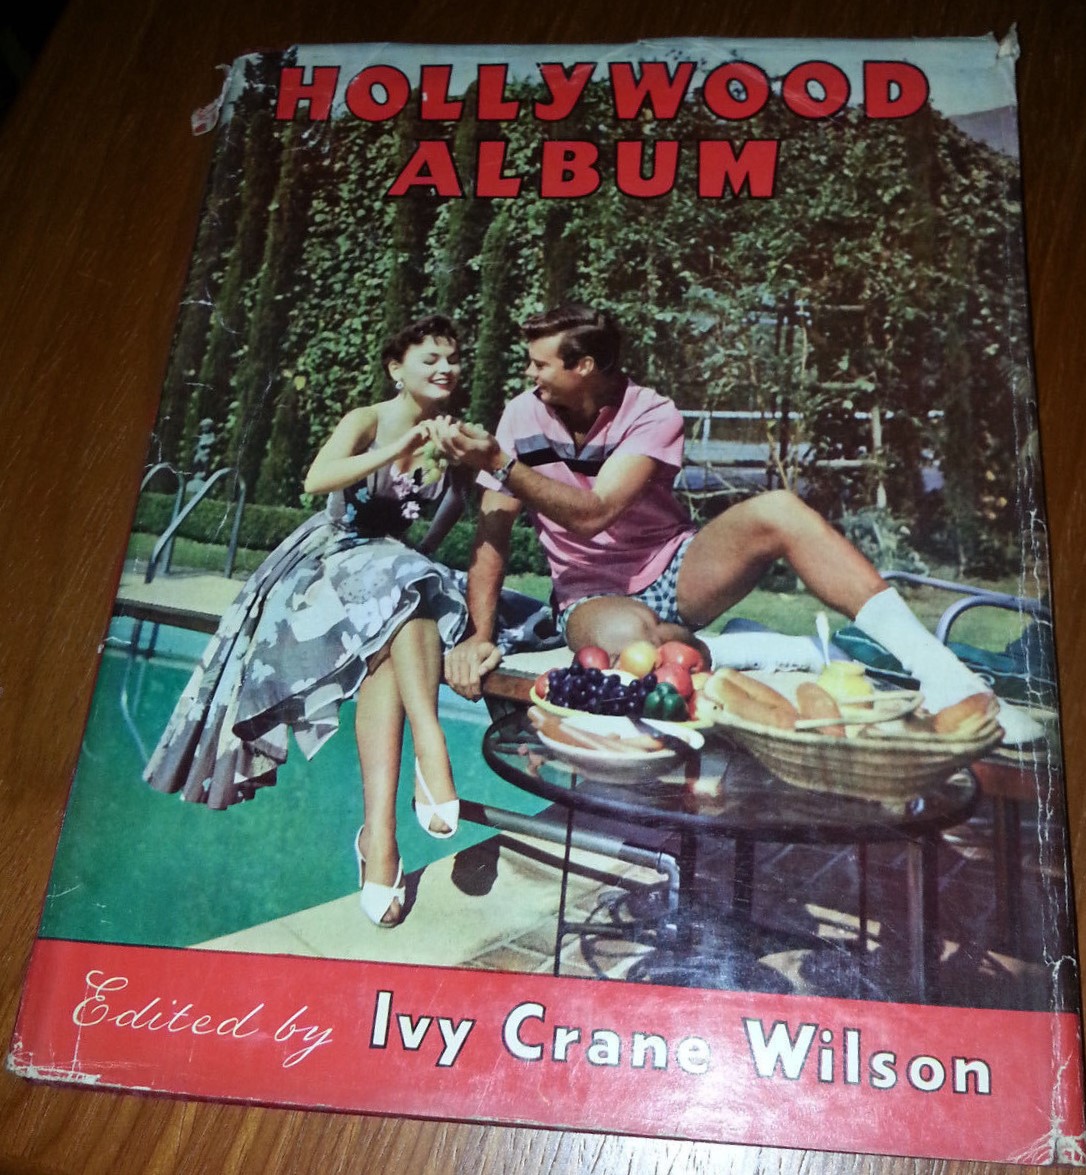  Early 1955  Ivy Crane Wilson was a British film columnist who annually published  Hollywood Album . The hardcover 1955 edition — containing articles “written by the stars themselves” — probably was published early in 1955. Bob’s story, “One Fateful 